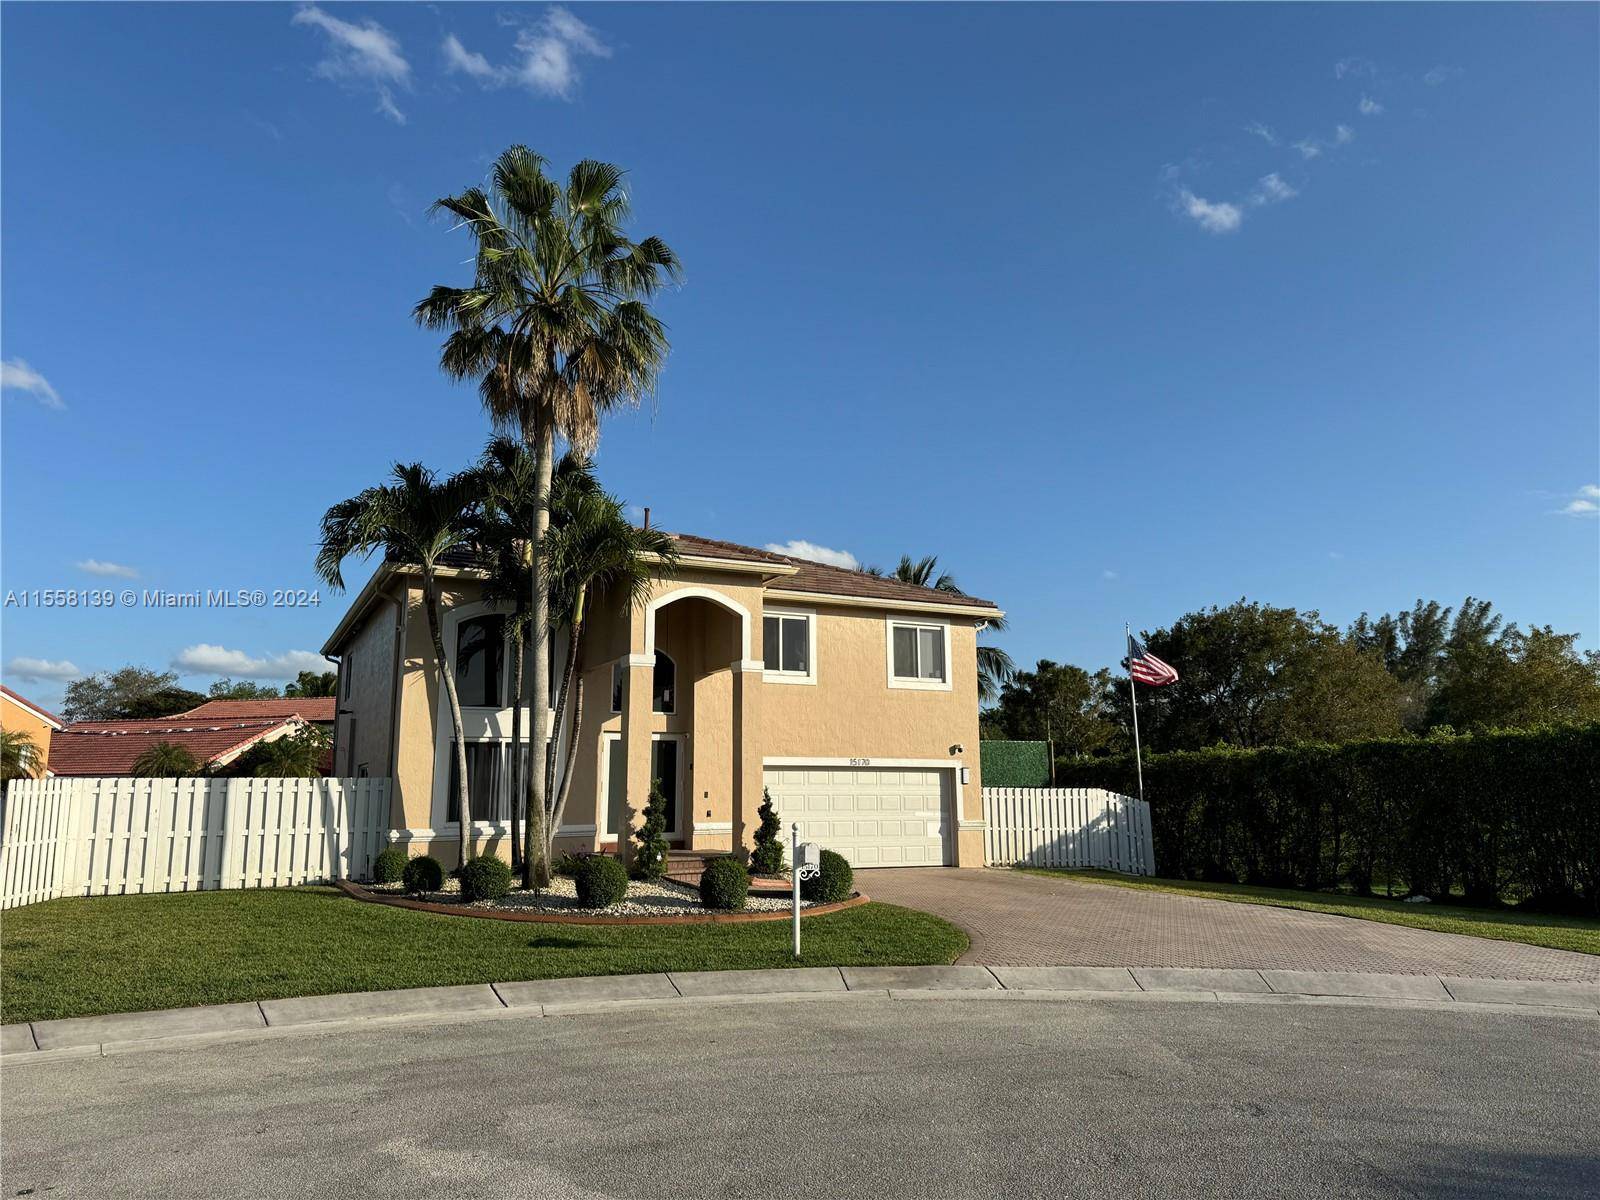 Beautiful remodeled 5 bedroom gem in the sough after community of Country Lakes Subdivision in Miramar.